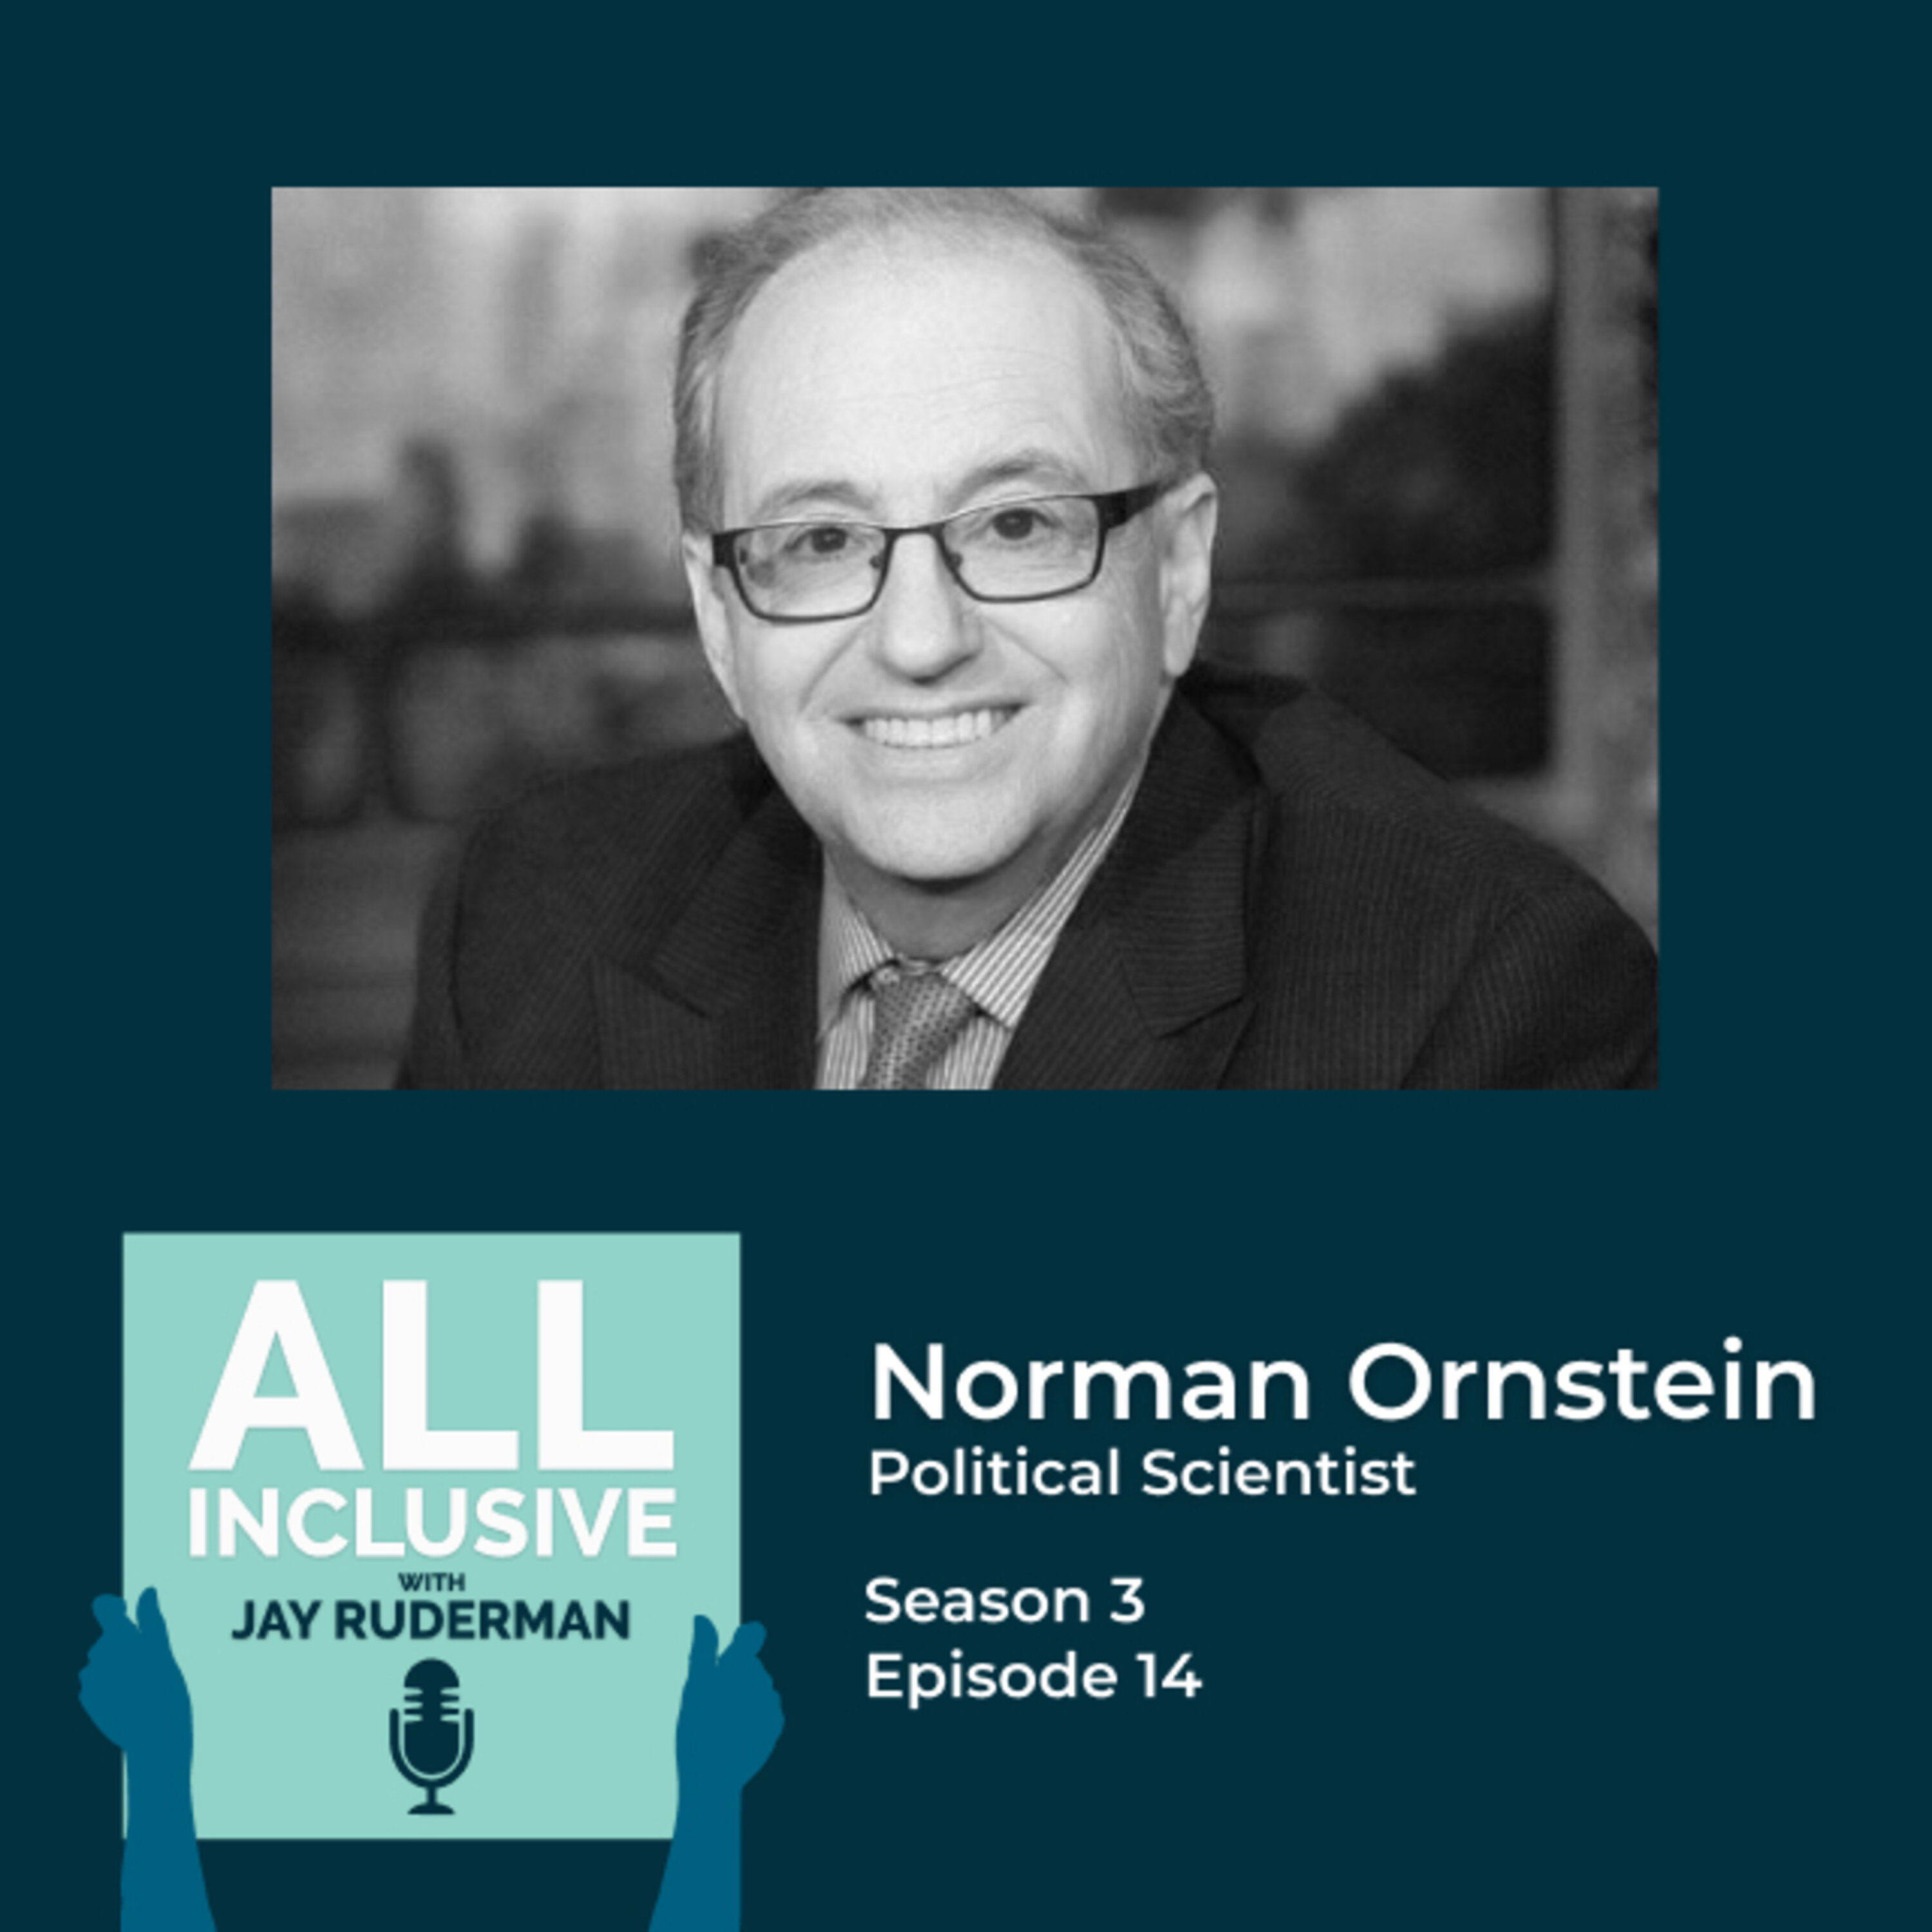 Season 3, Episode 14: Author and Political Scientist, Norman Ornstein on Covid-19, Mental Health and the November Election